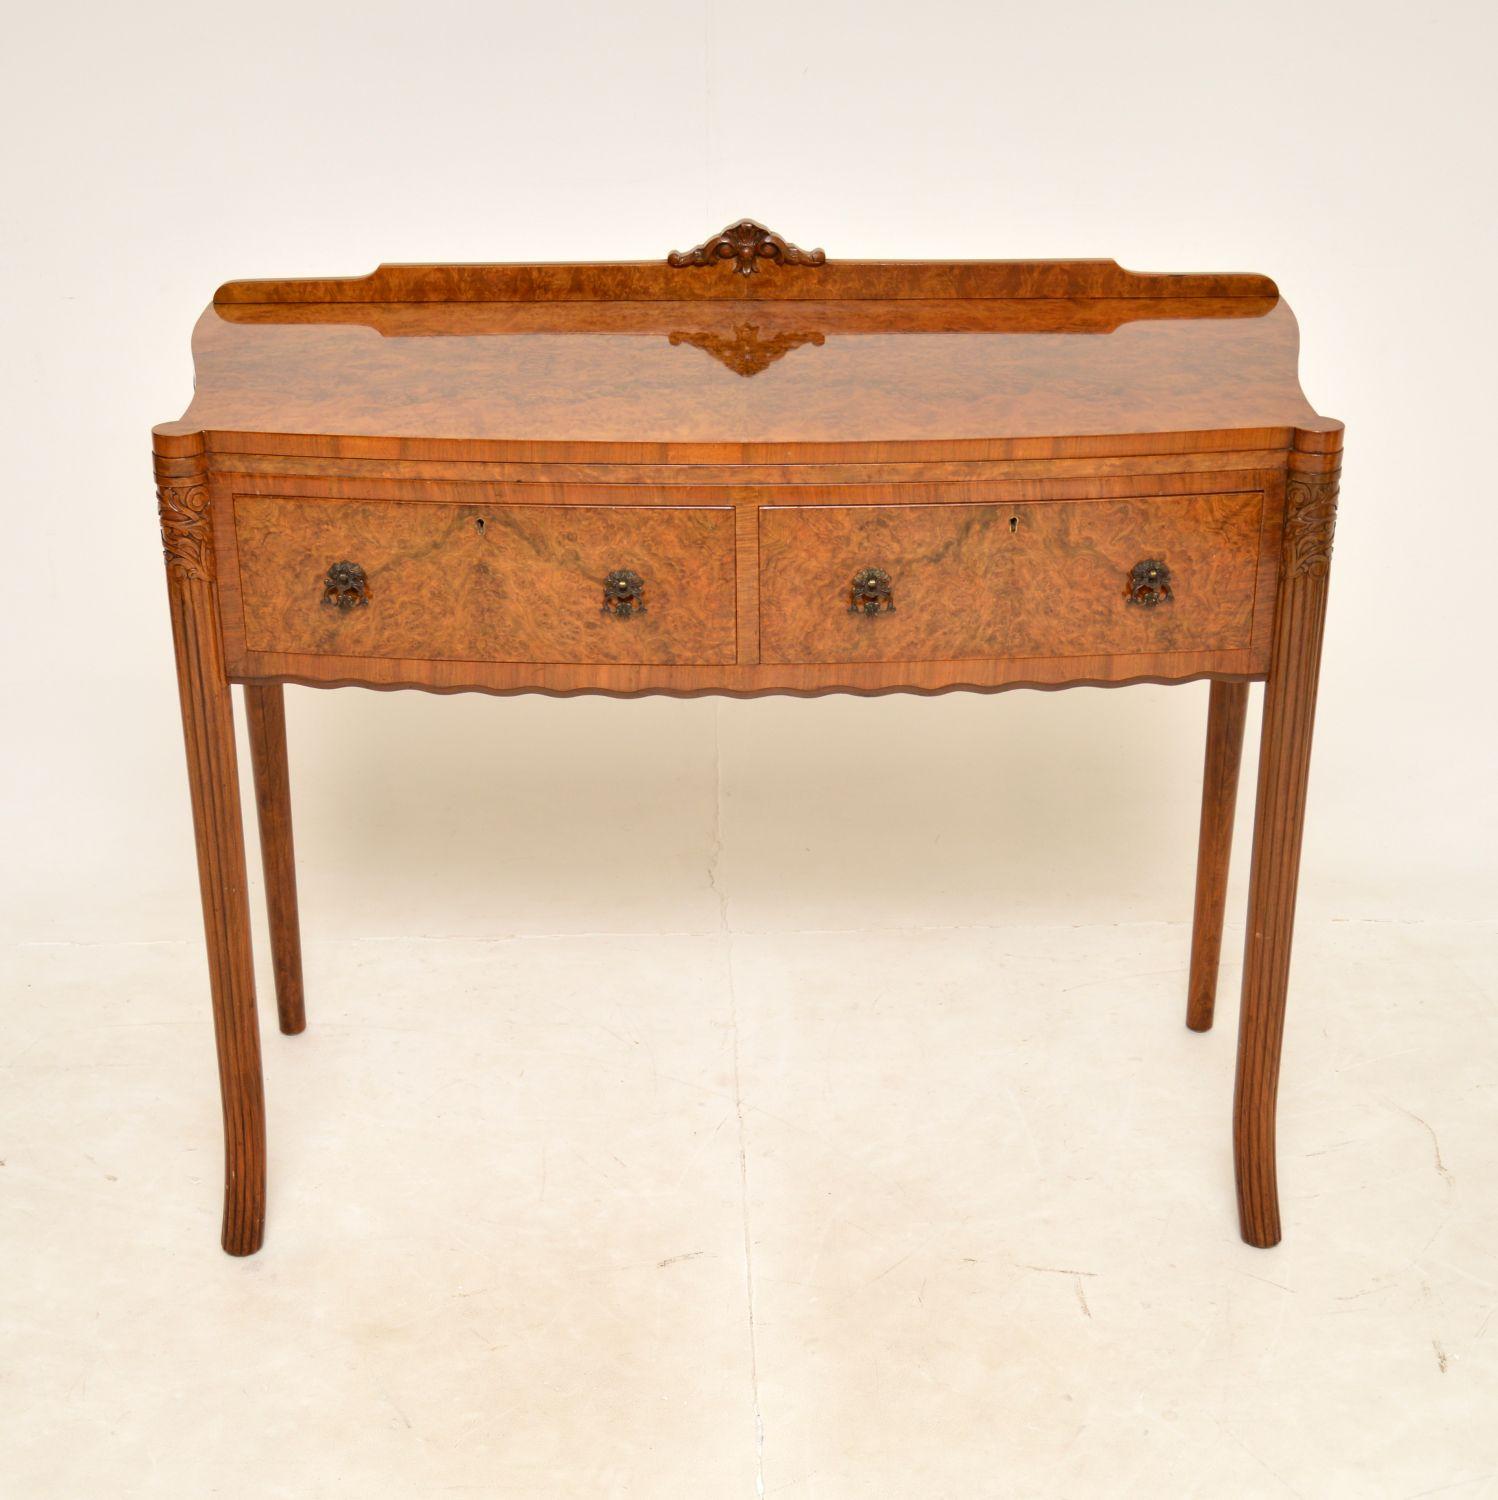 A stunning and extremely well made burr walnut console / server table in burr walnut. This was made in England, it dates from the 1920’s.

The quality is outstanding, this has absolutely gorgeous burr walnut grain patterns throughout. It sits on